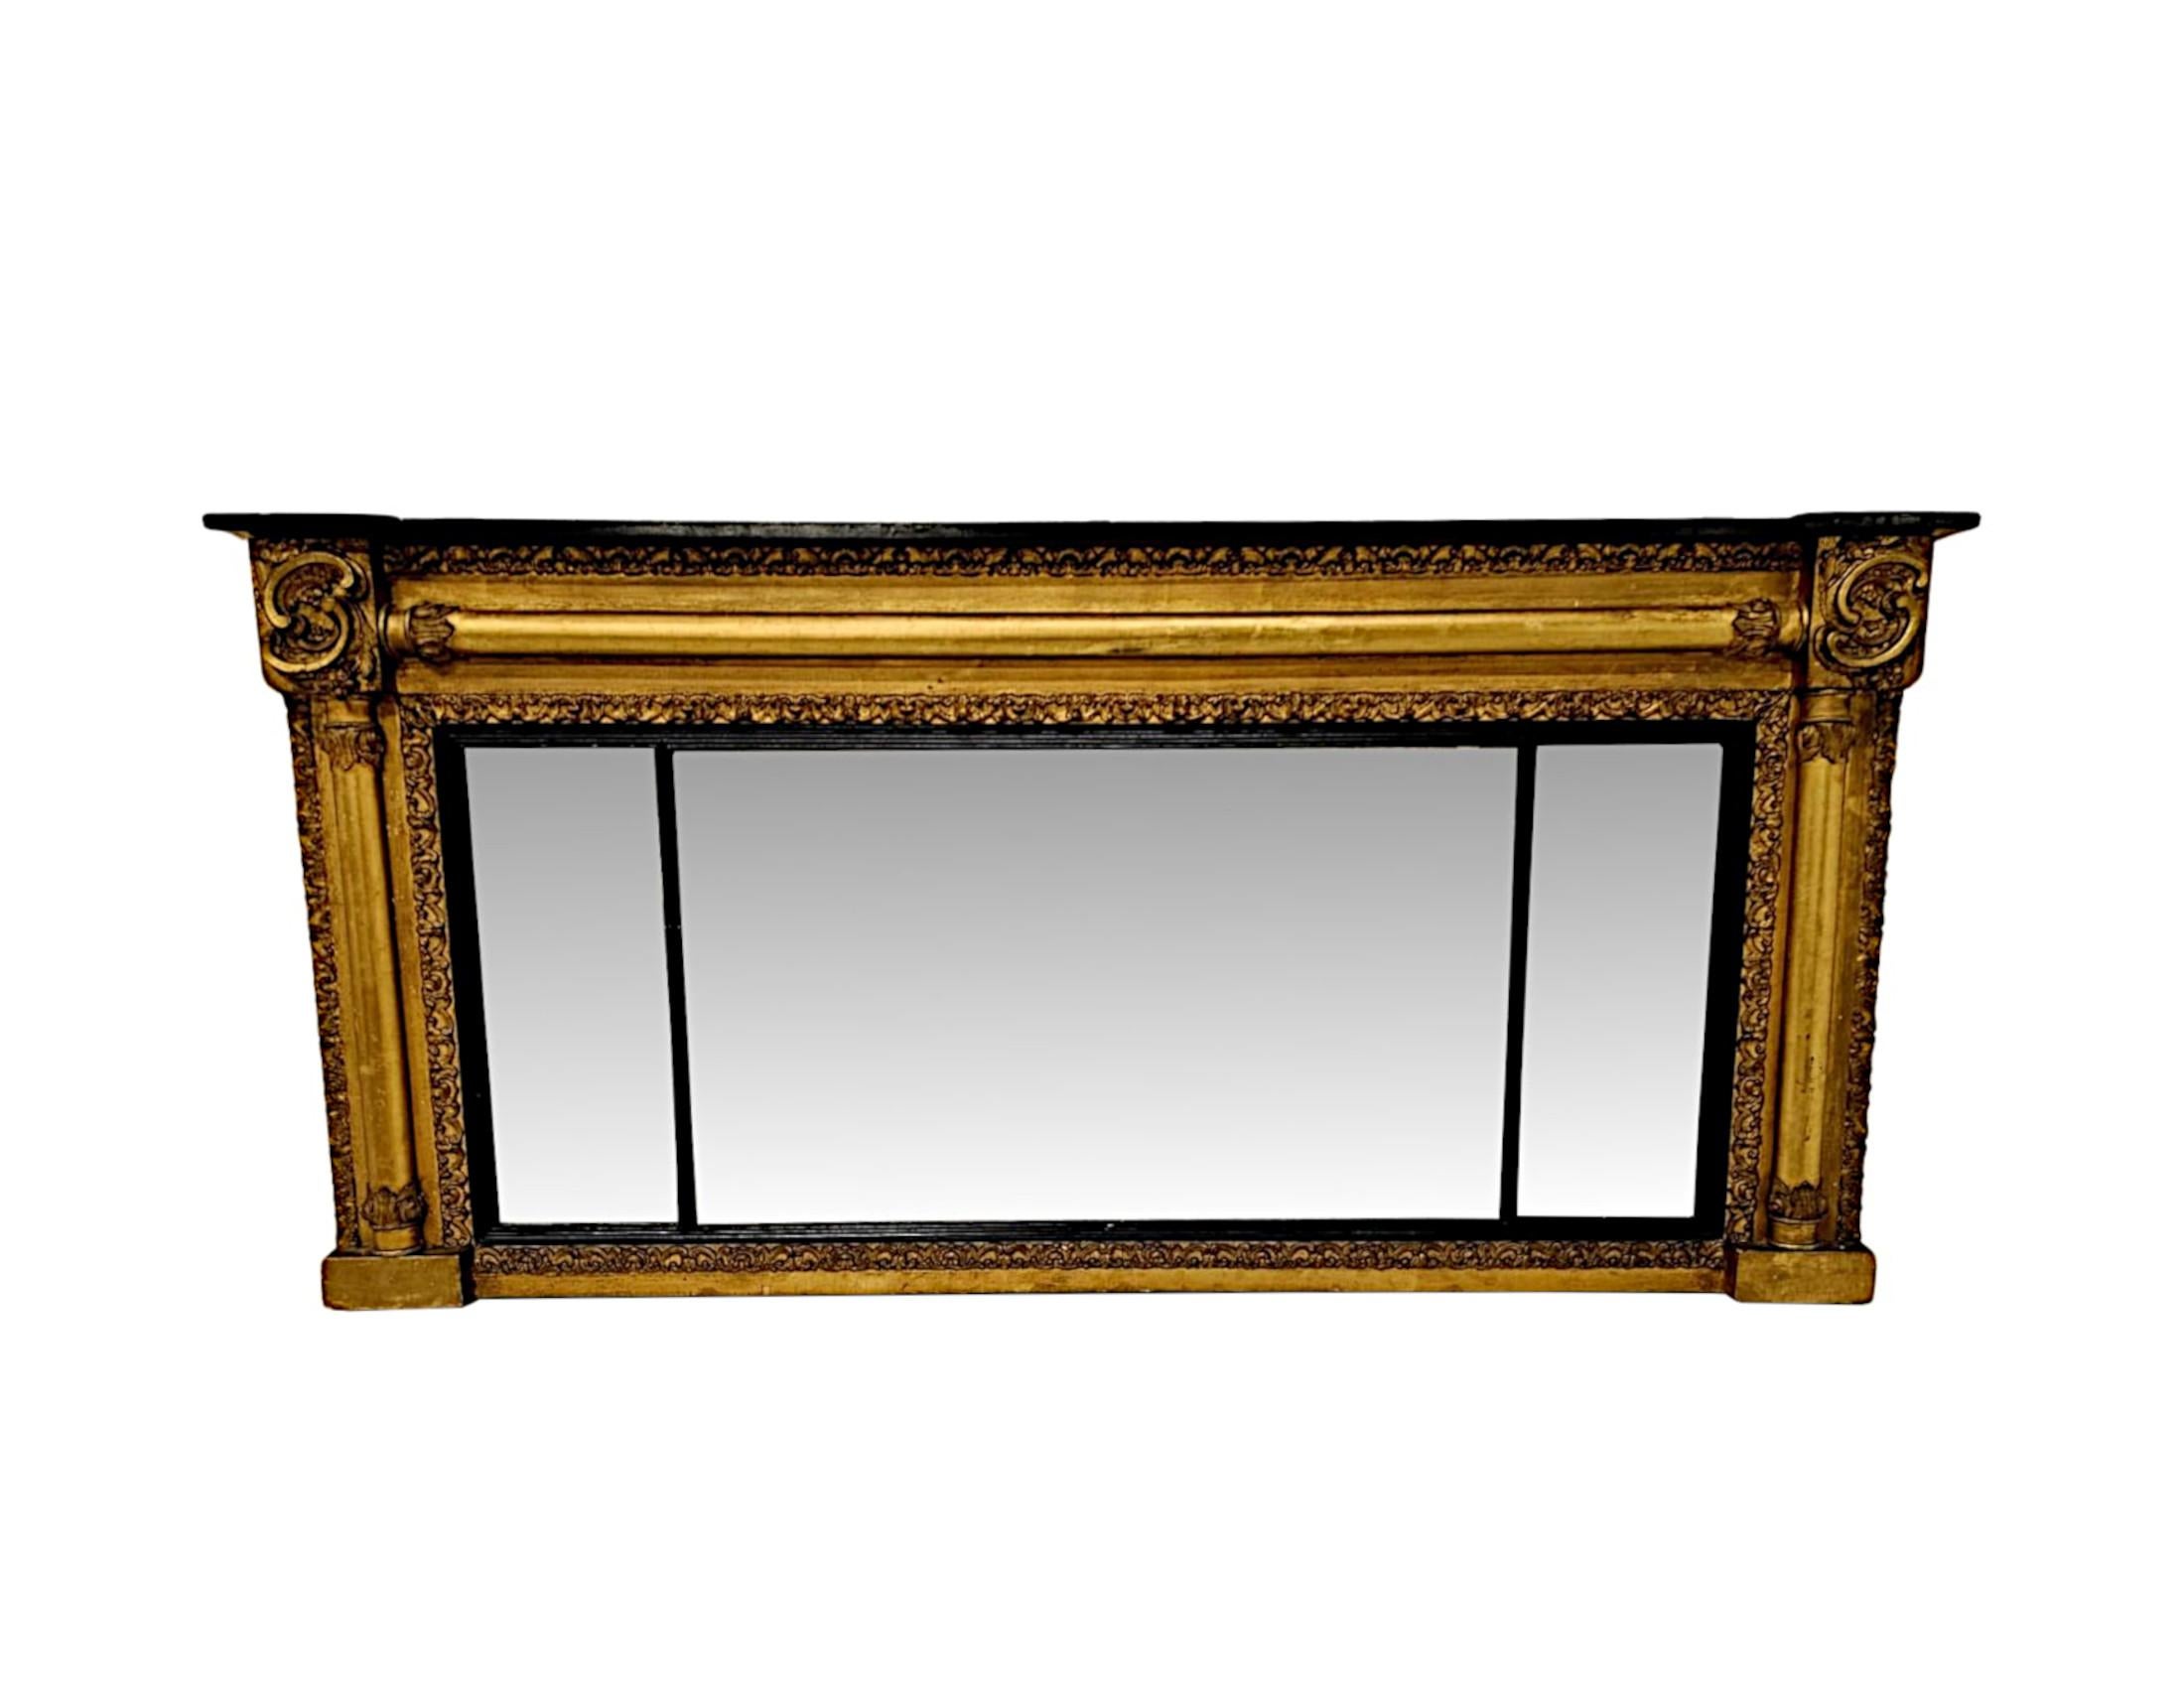 English A Stunning Unusual 19th Century Giltwood Tryptch Overmantel Mirror For Sale